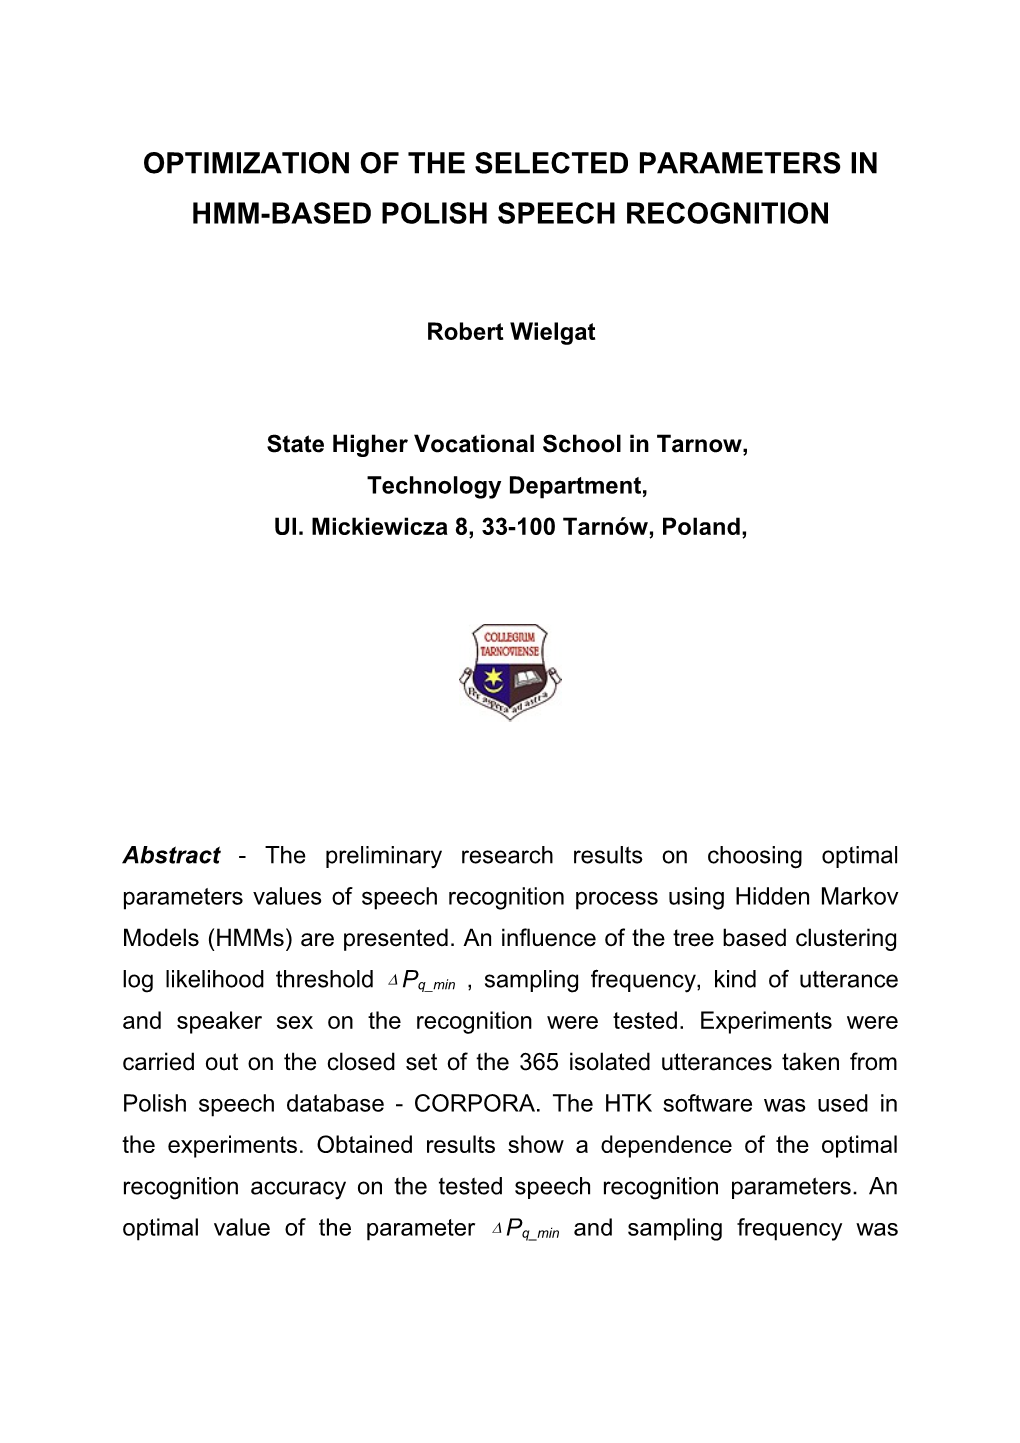 Optimization of the Selected Parameters in Hmm-Based Polish Speech Recognition